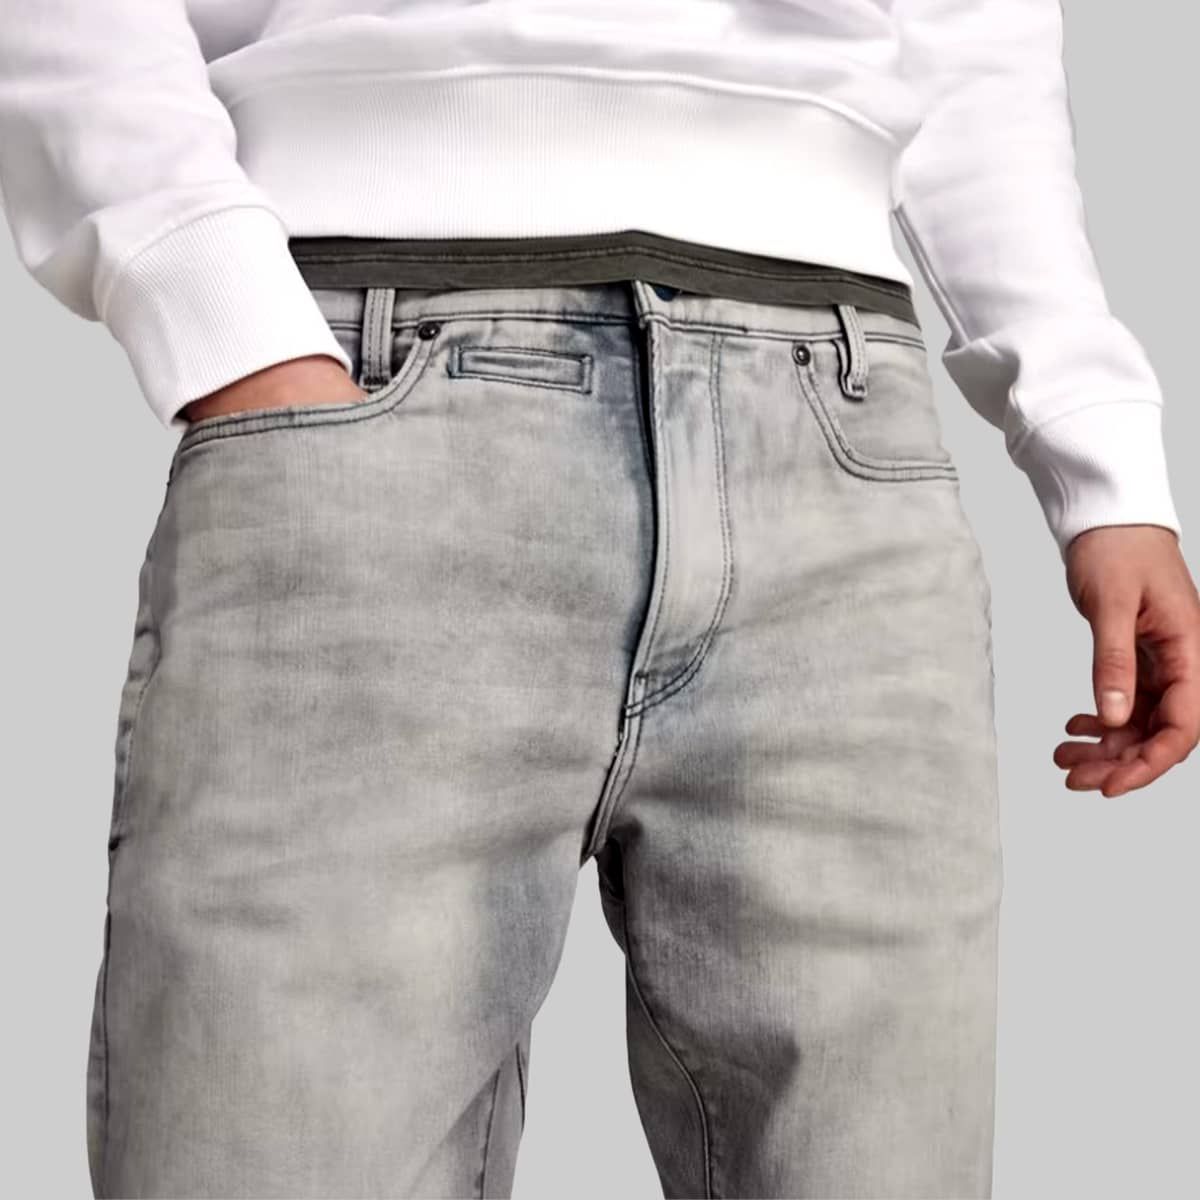 3D Slim Faded Grey Jeans